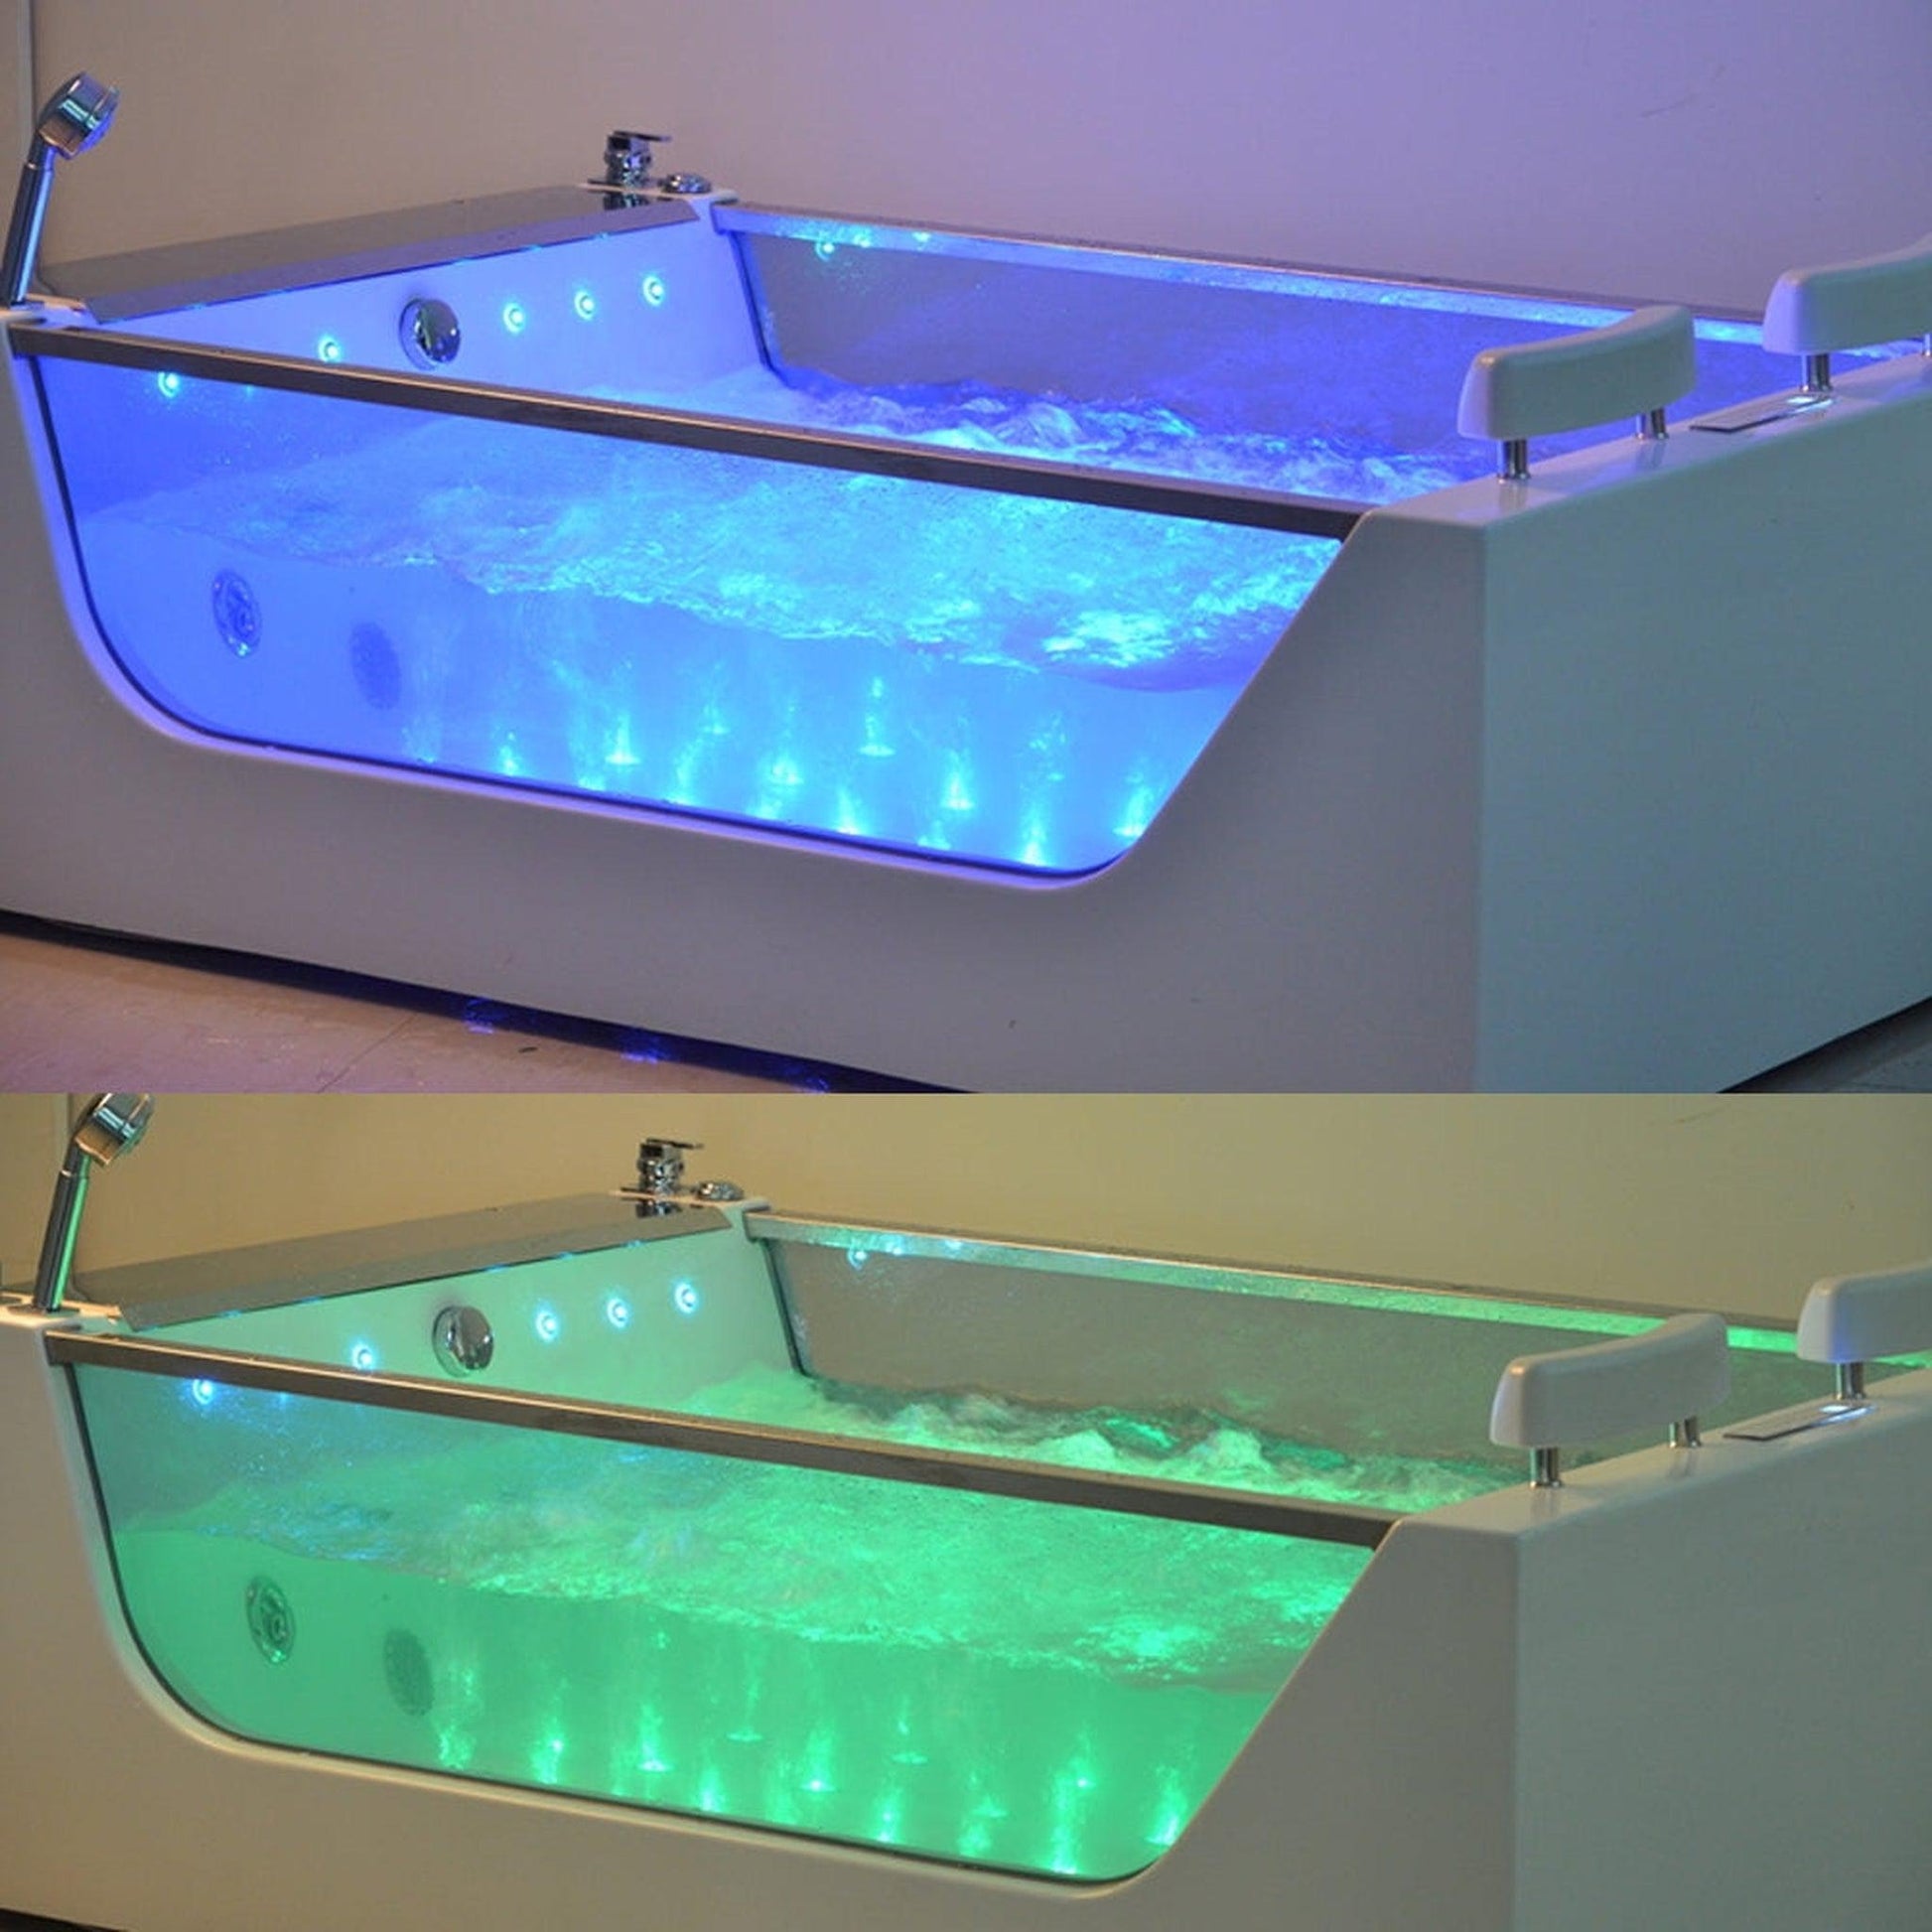 Fontana Sierra 71" x 47" 2-Person White Rectangular Freestanding Whirlpool Massage Indoor Acrylic Glass Bathtub With Bubbles LED Multicolor Light